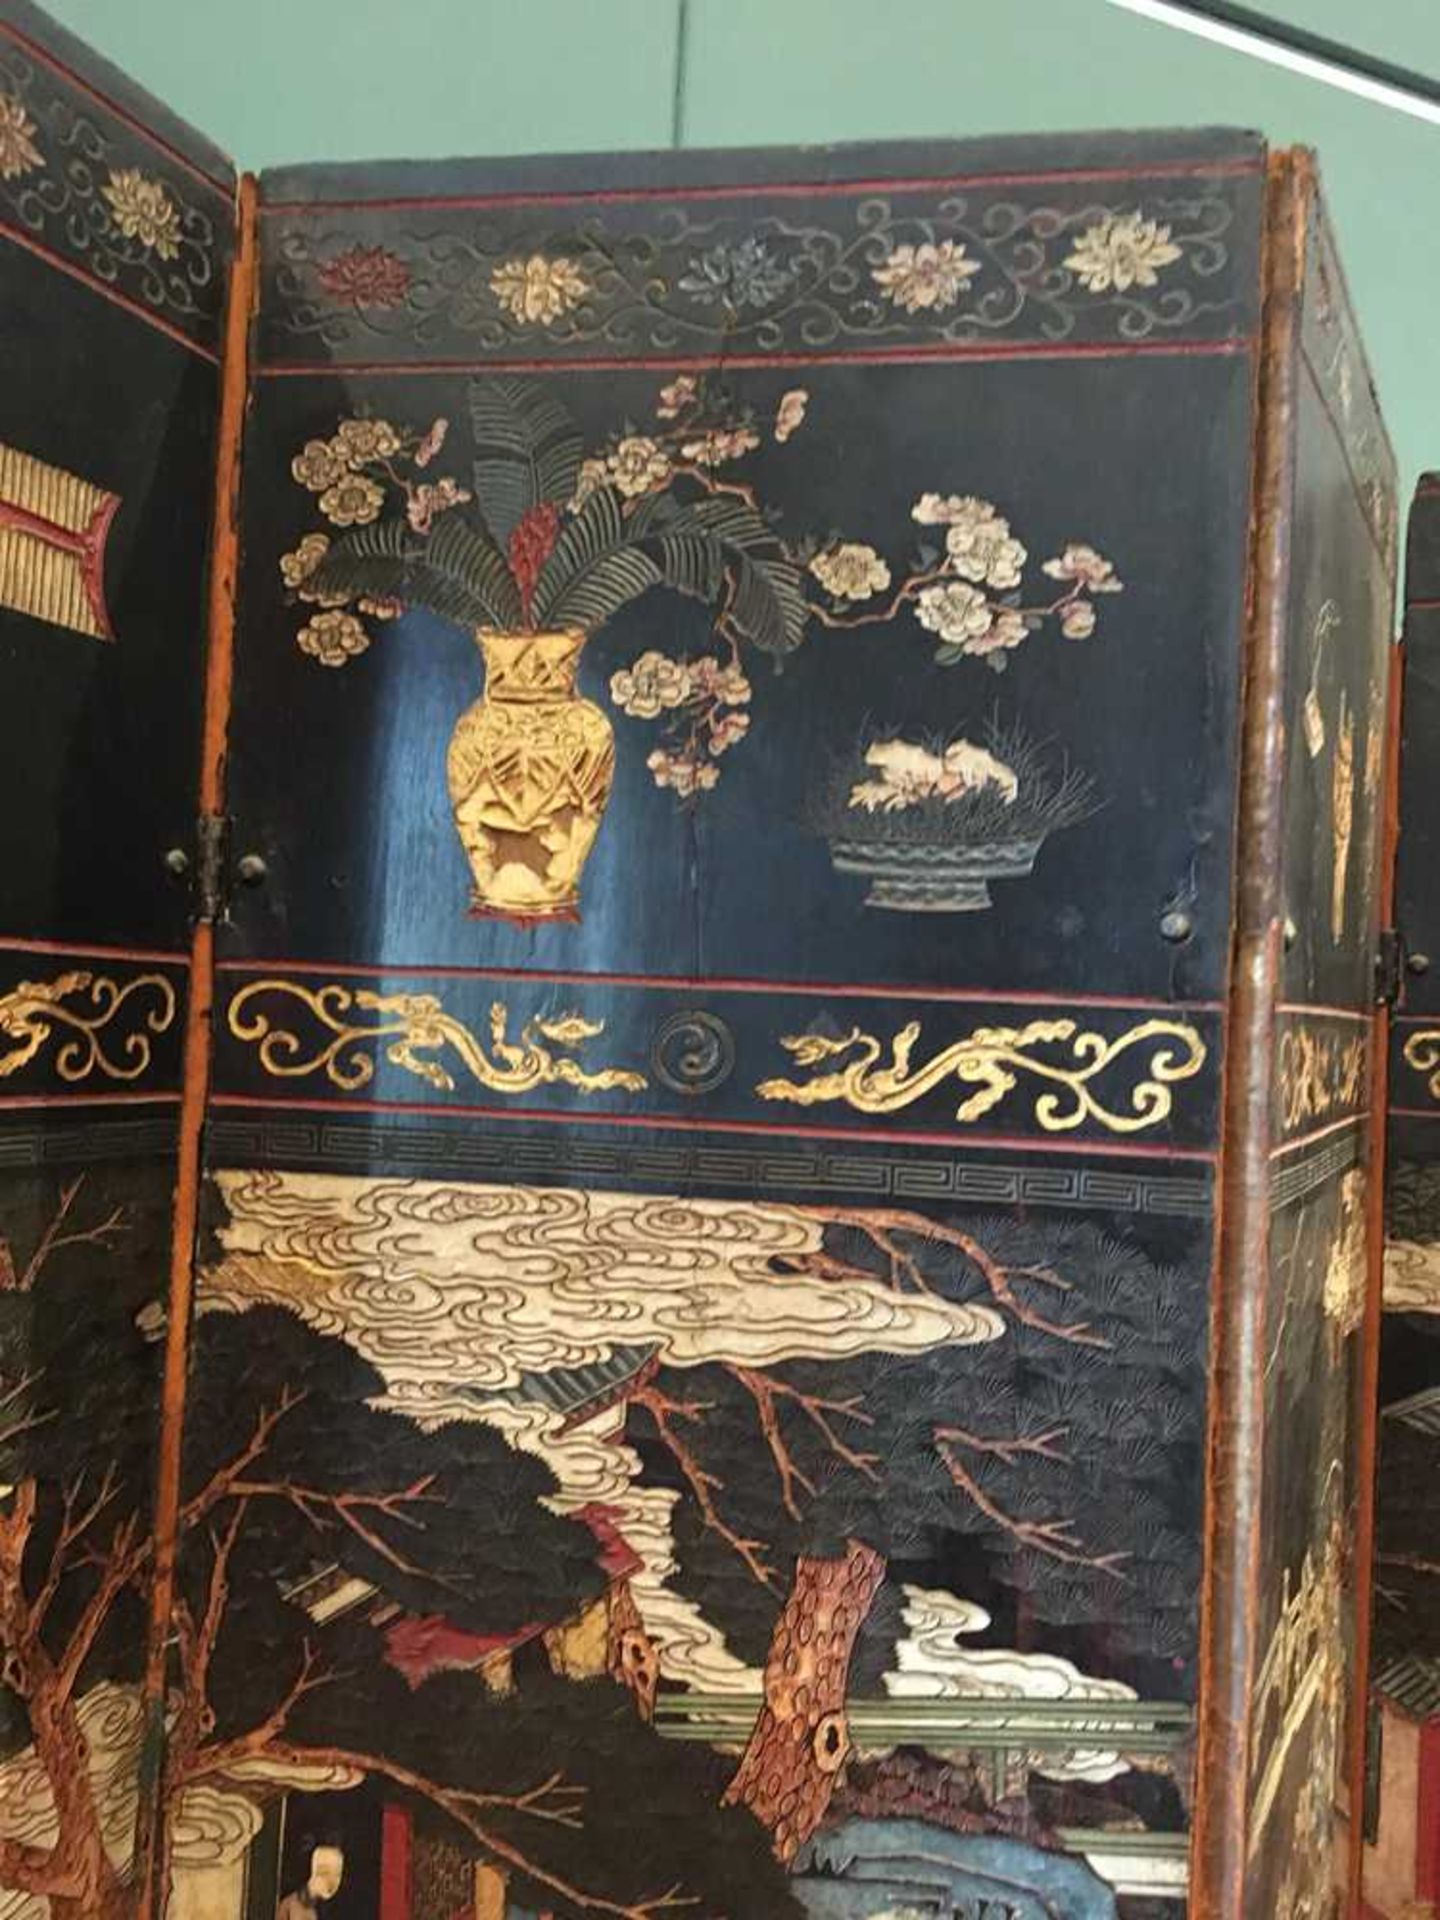 A CHINESE COROMANDEL BLACK LACQUER TWELVE-PANEL SCREEN QING DYNASTY, 18TH CENTURY - Image 32 of 72